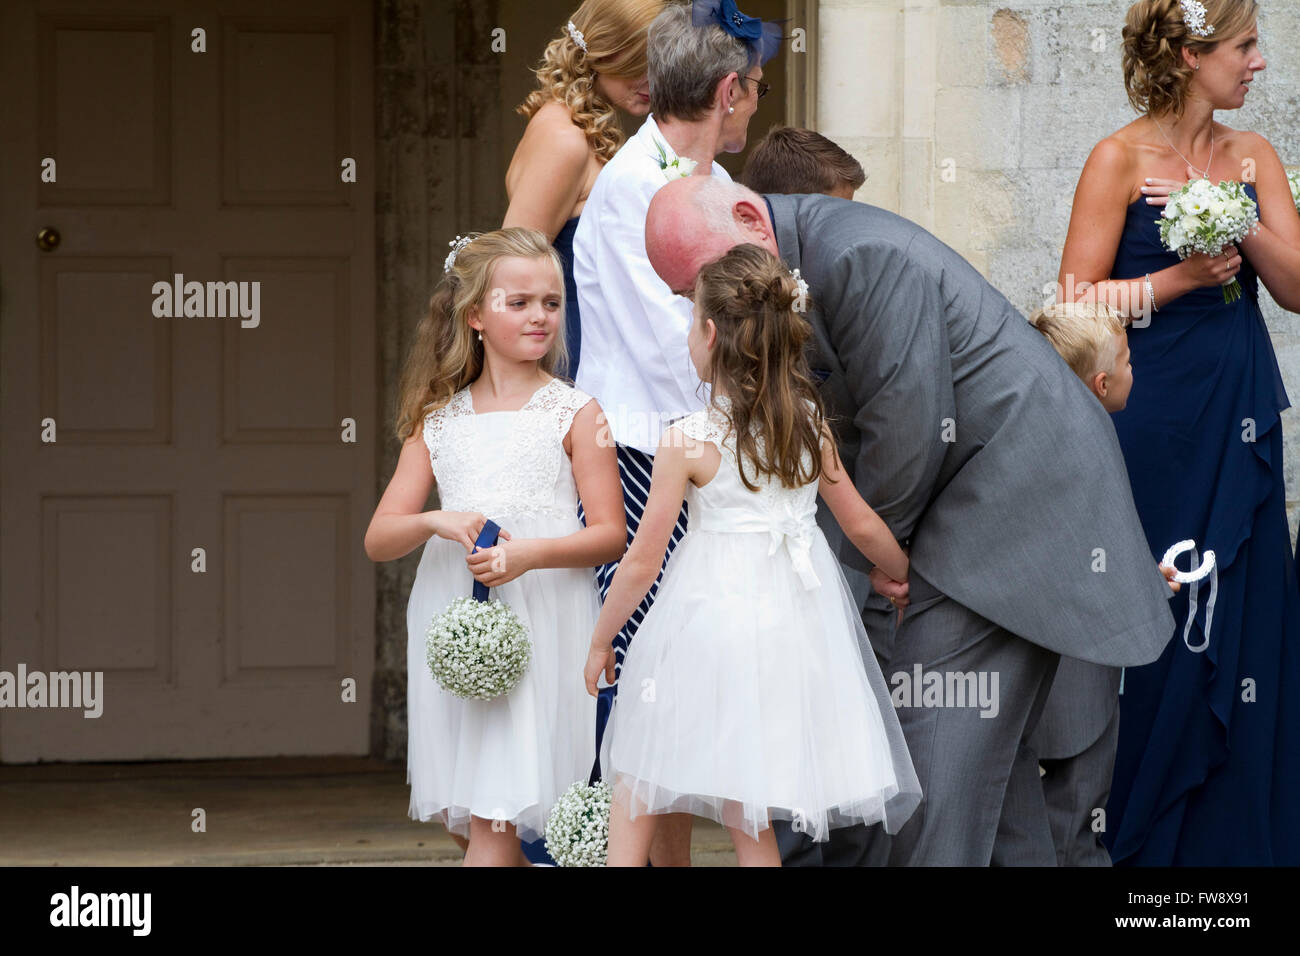 Two young bridesmaids face off whilst a grandfather intervenes Stock Photo